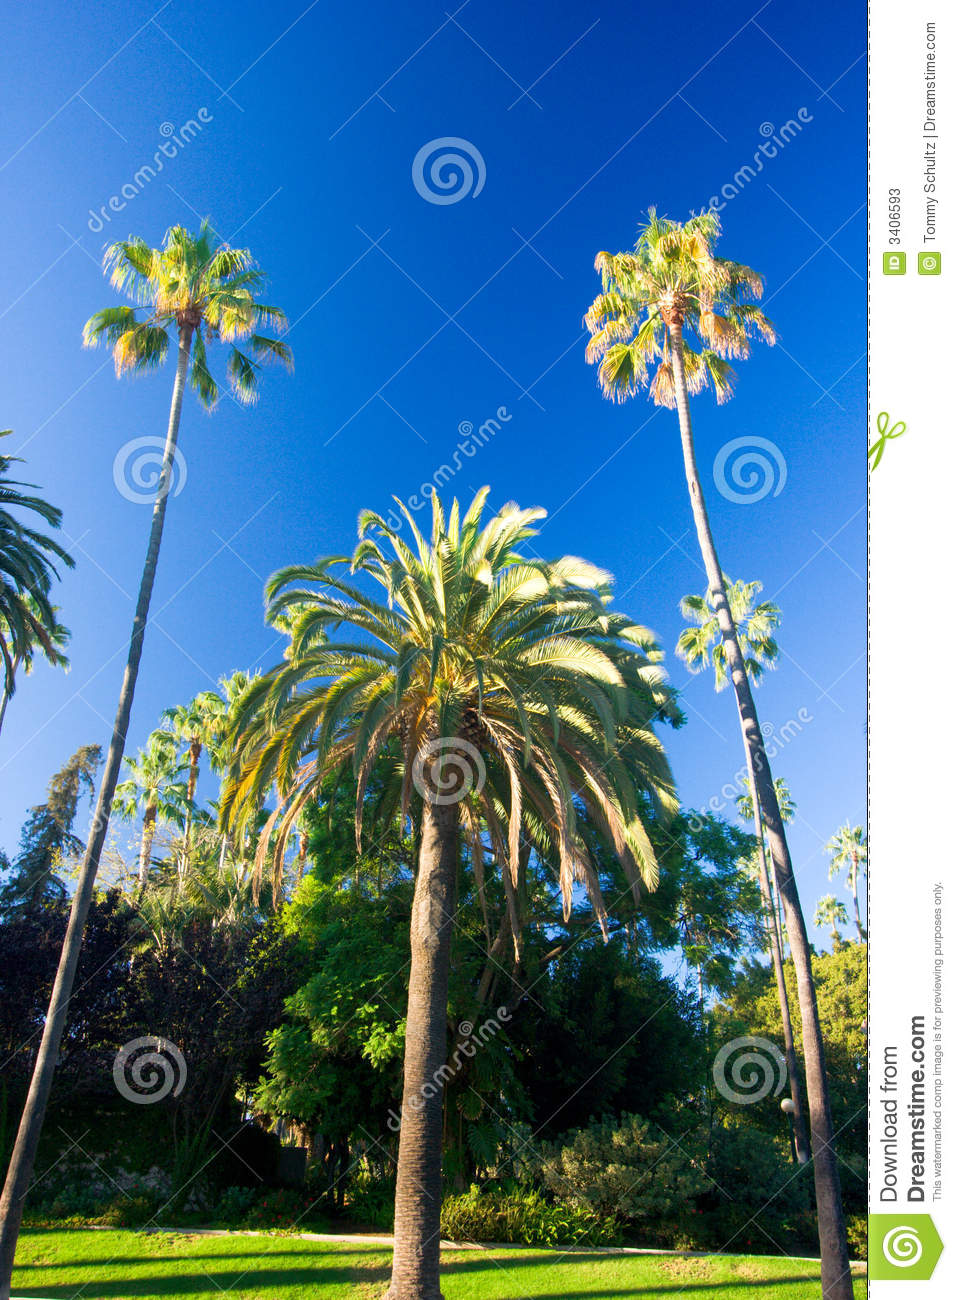 Tall Palm Trees in California